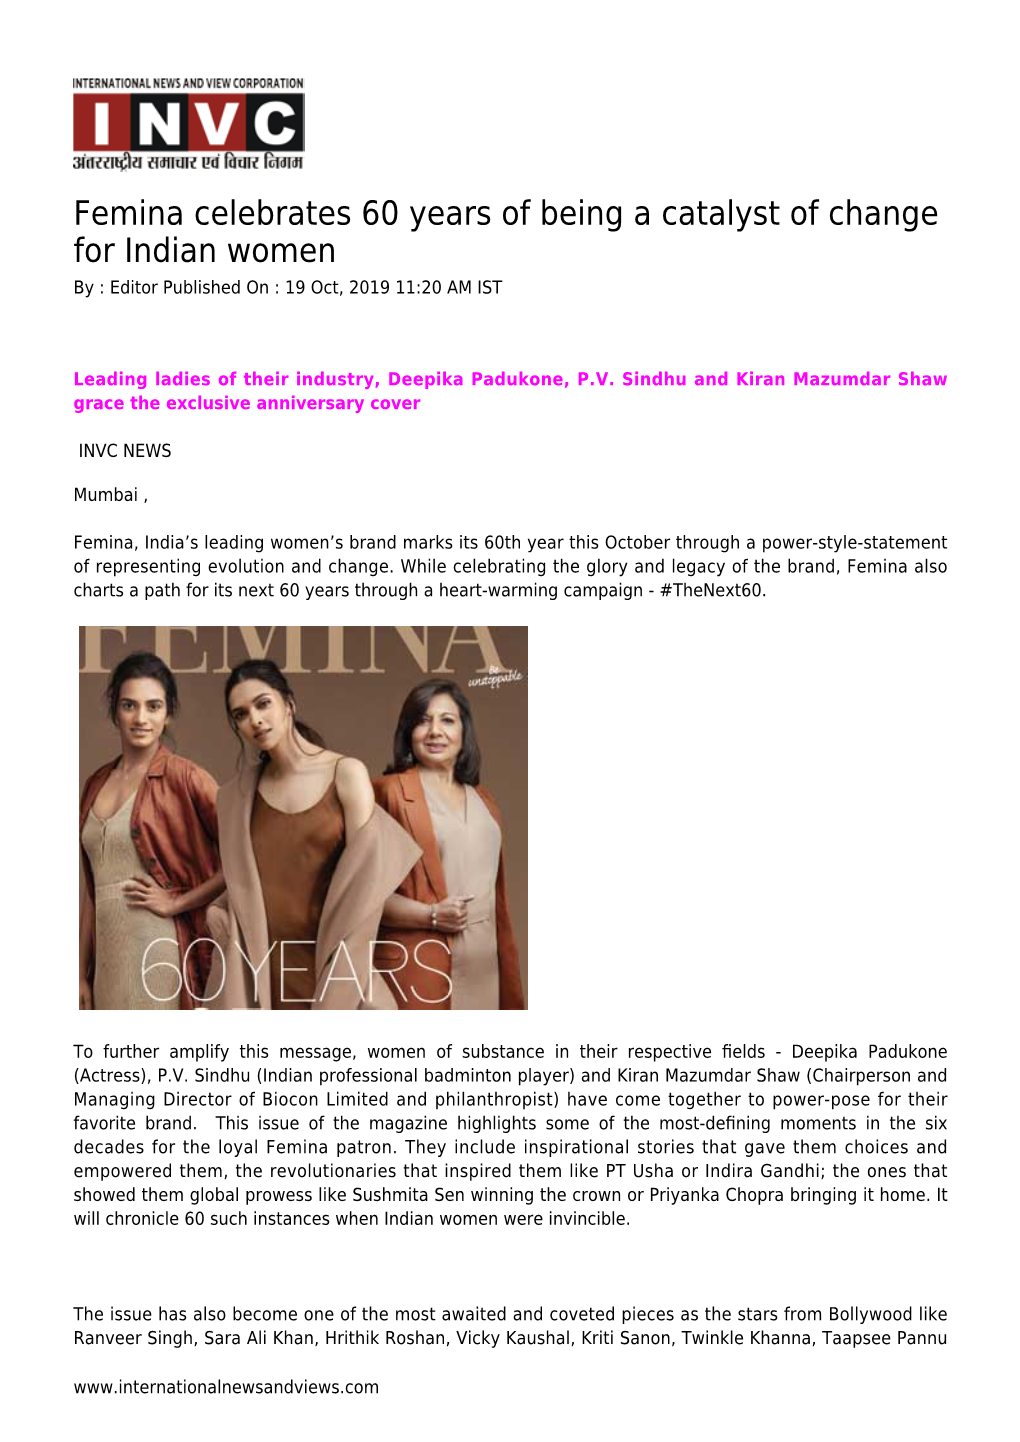 Femina Celebrates 60 Years of Being a Catalyst of Change for Indian Women by : Editor Published on : 19 Oct, 2019 11:20 AM IST